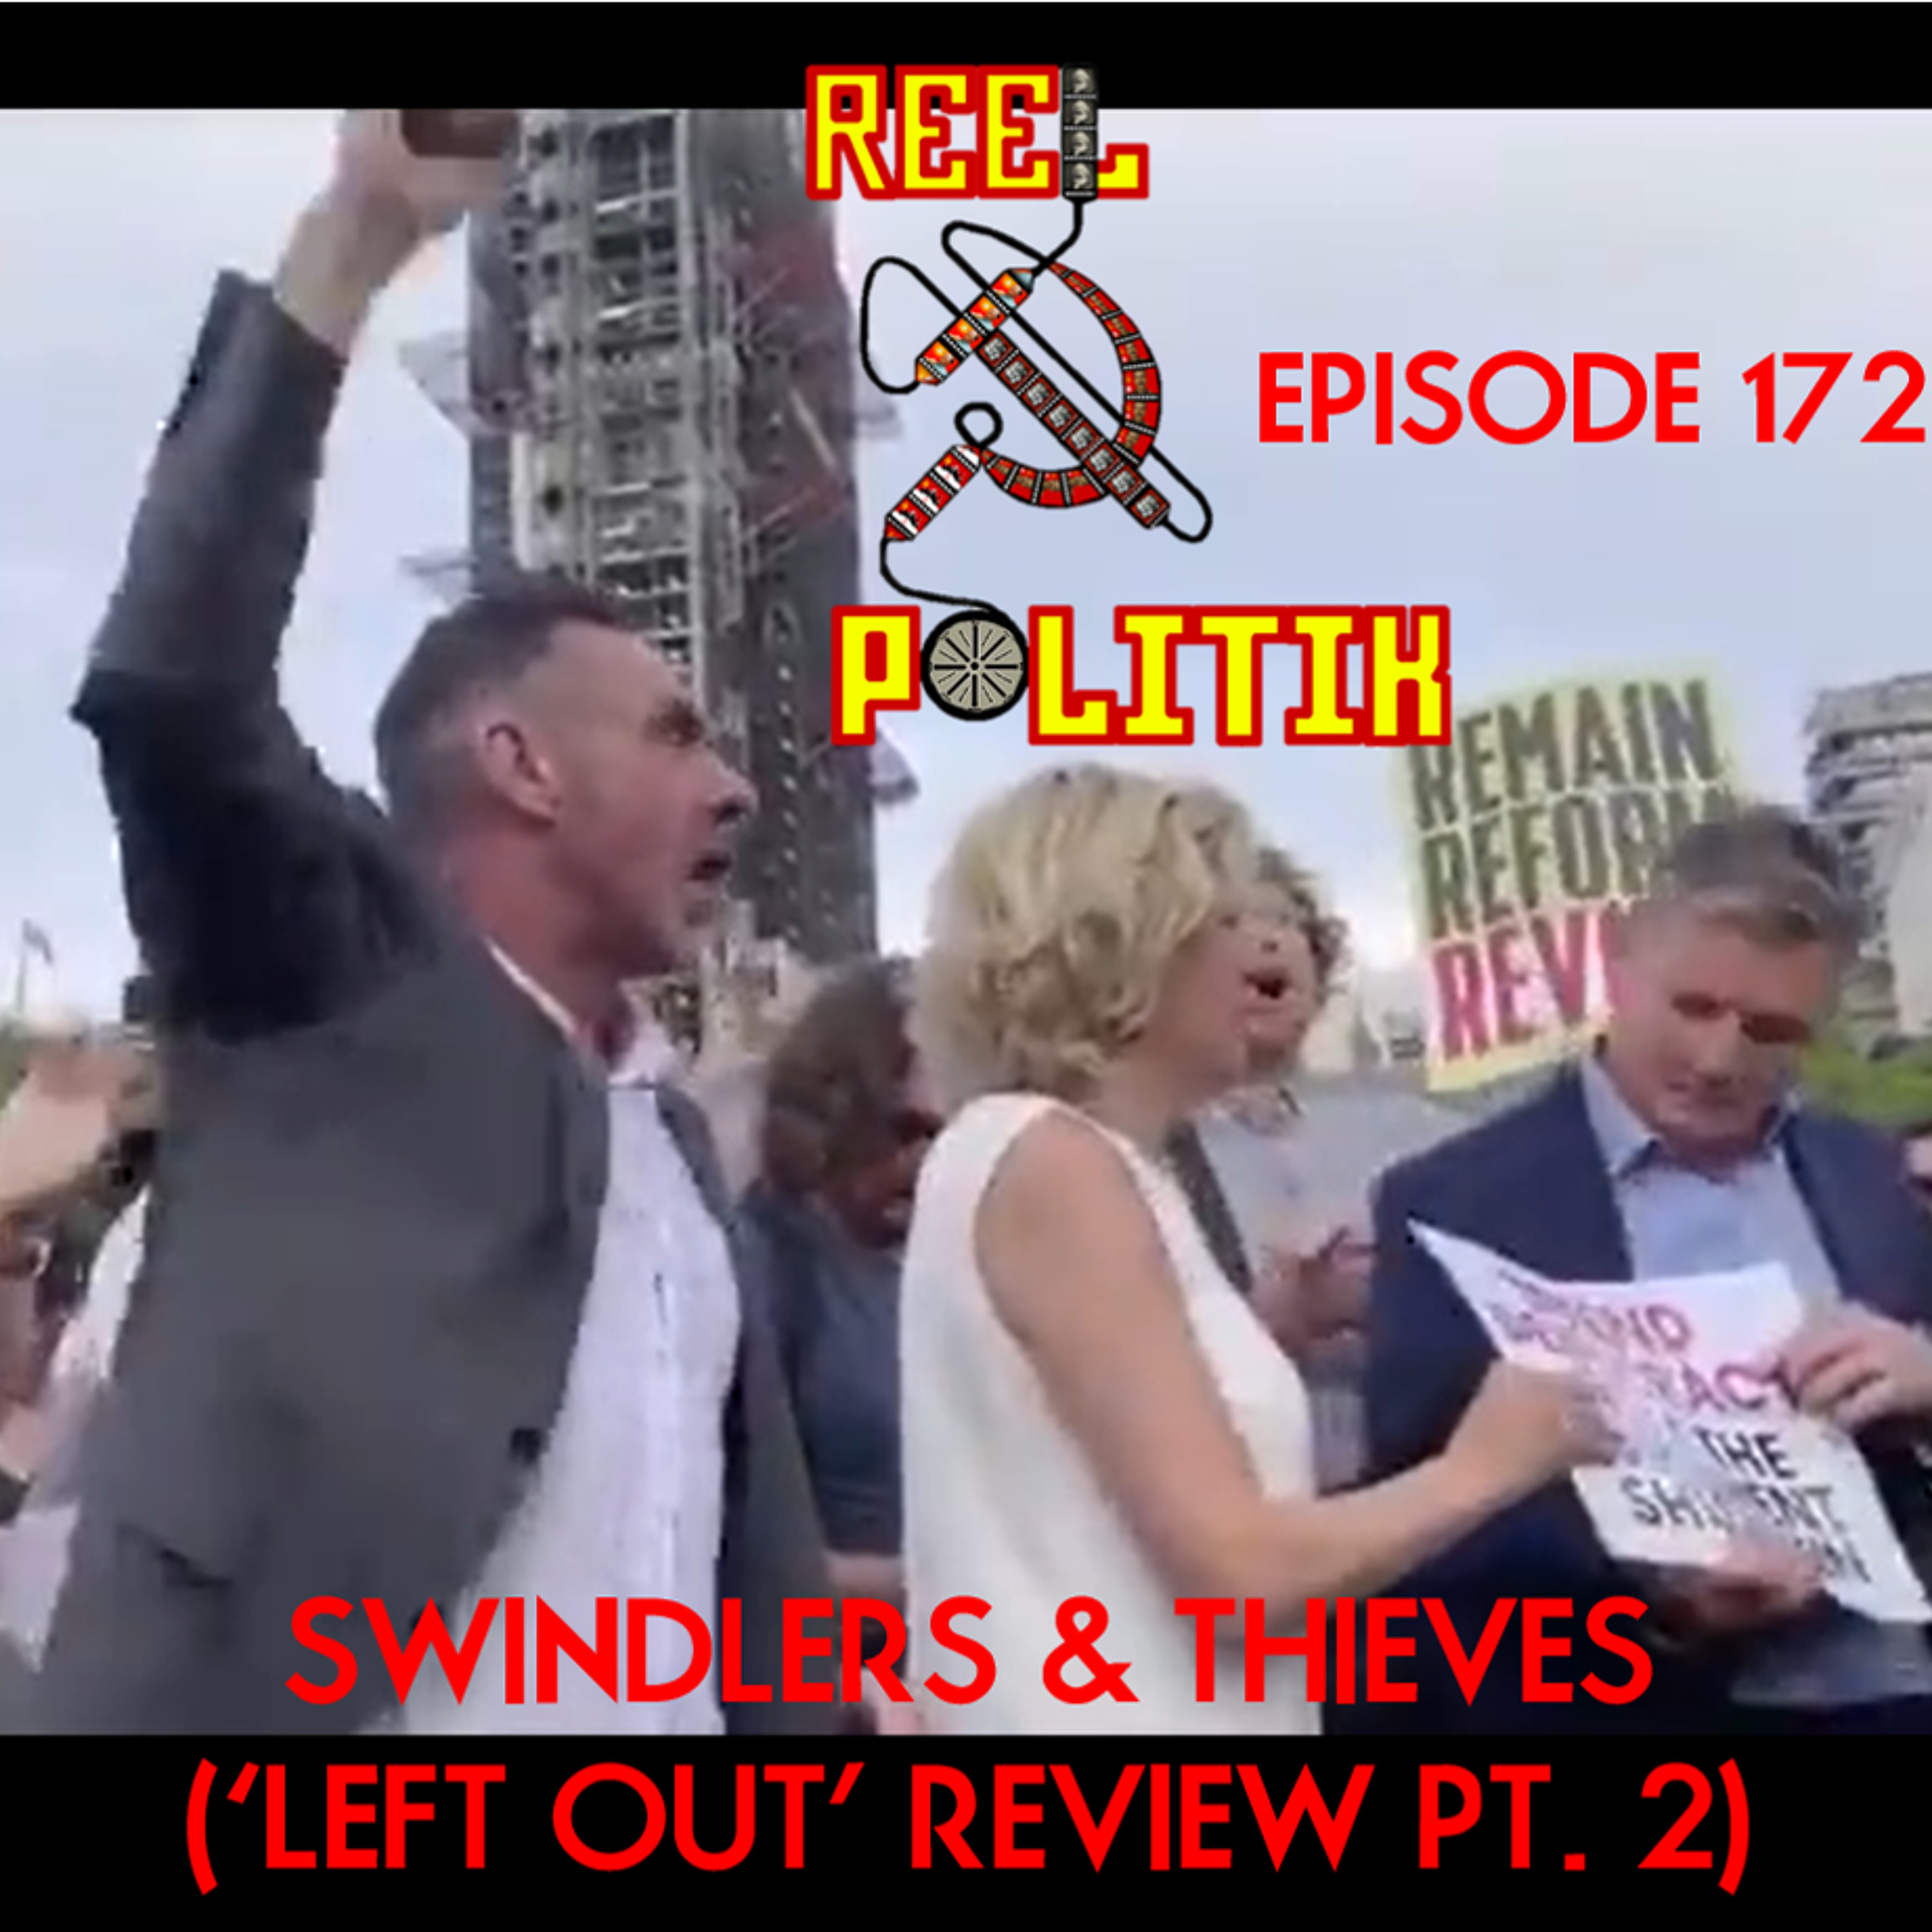 Episode 172 - Swindlers & Thieves (’Left Out’ Review Pt. 2)